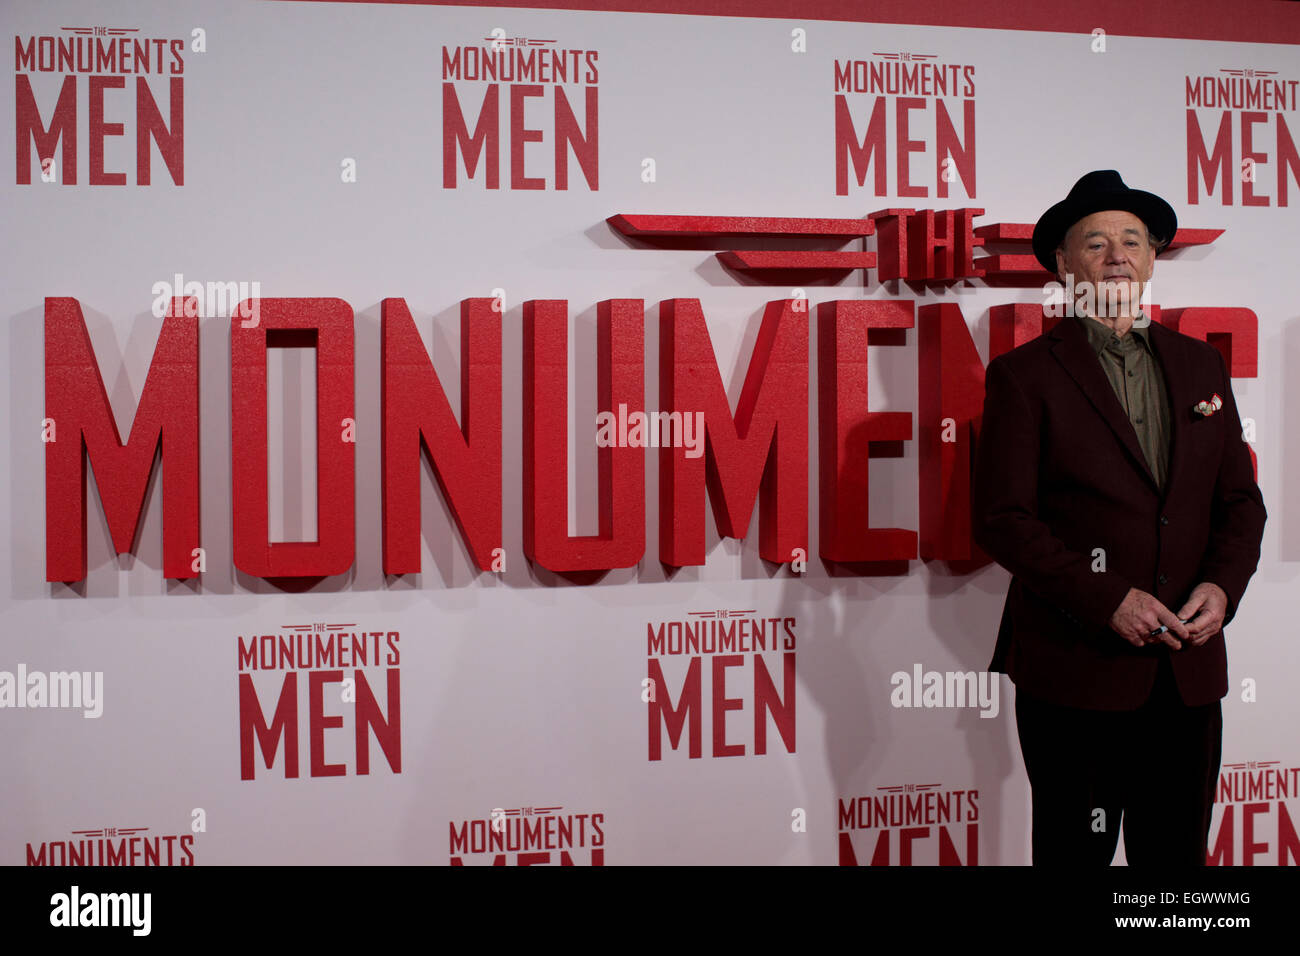 UNITED KINGDOM, London : US actor Bill Murray poses on the red carpet as he arrives for the UK premiere of the film 'The Monuments Men' in central London on February 11, 2014. The film is expected to be released in Britain on February 14, 2014. Stock Photo